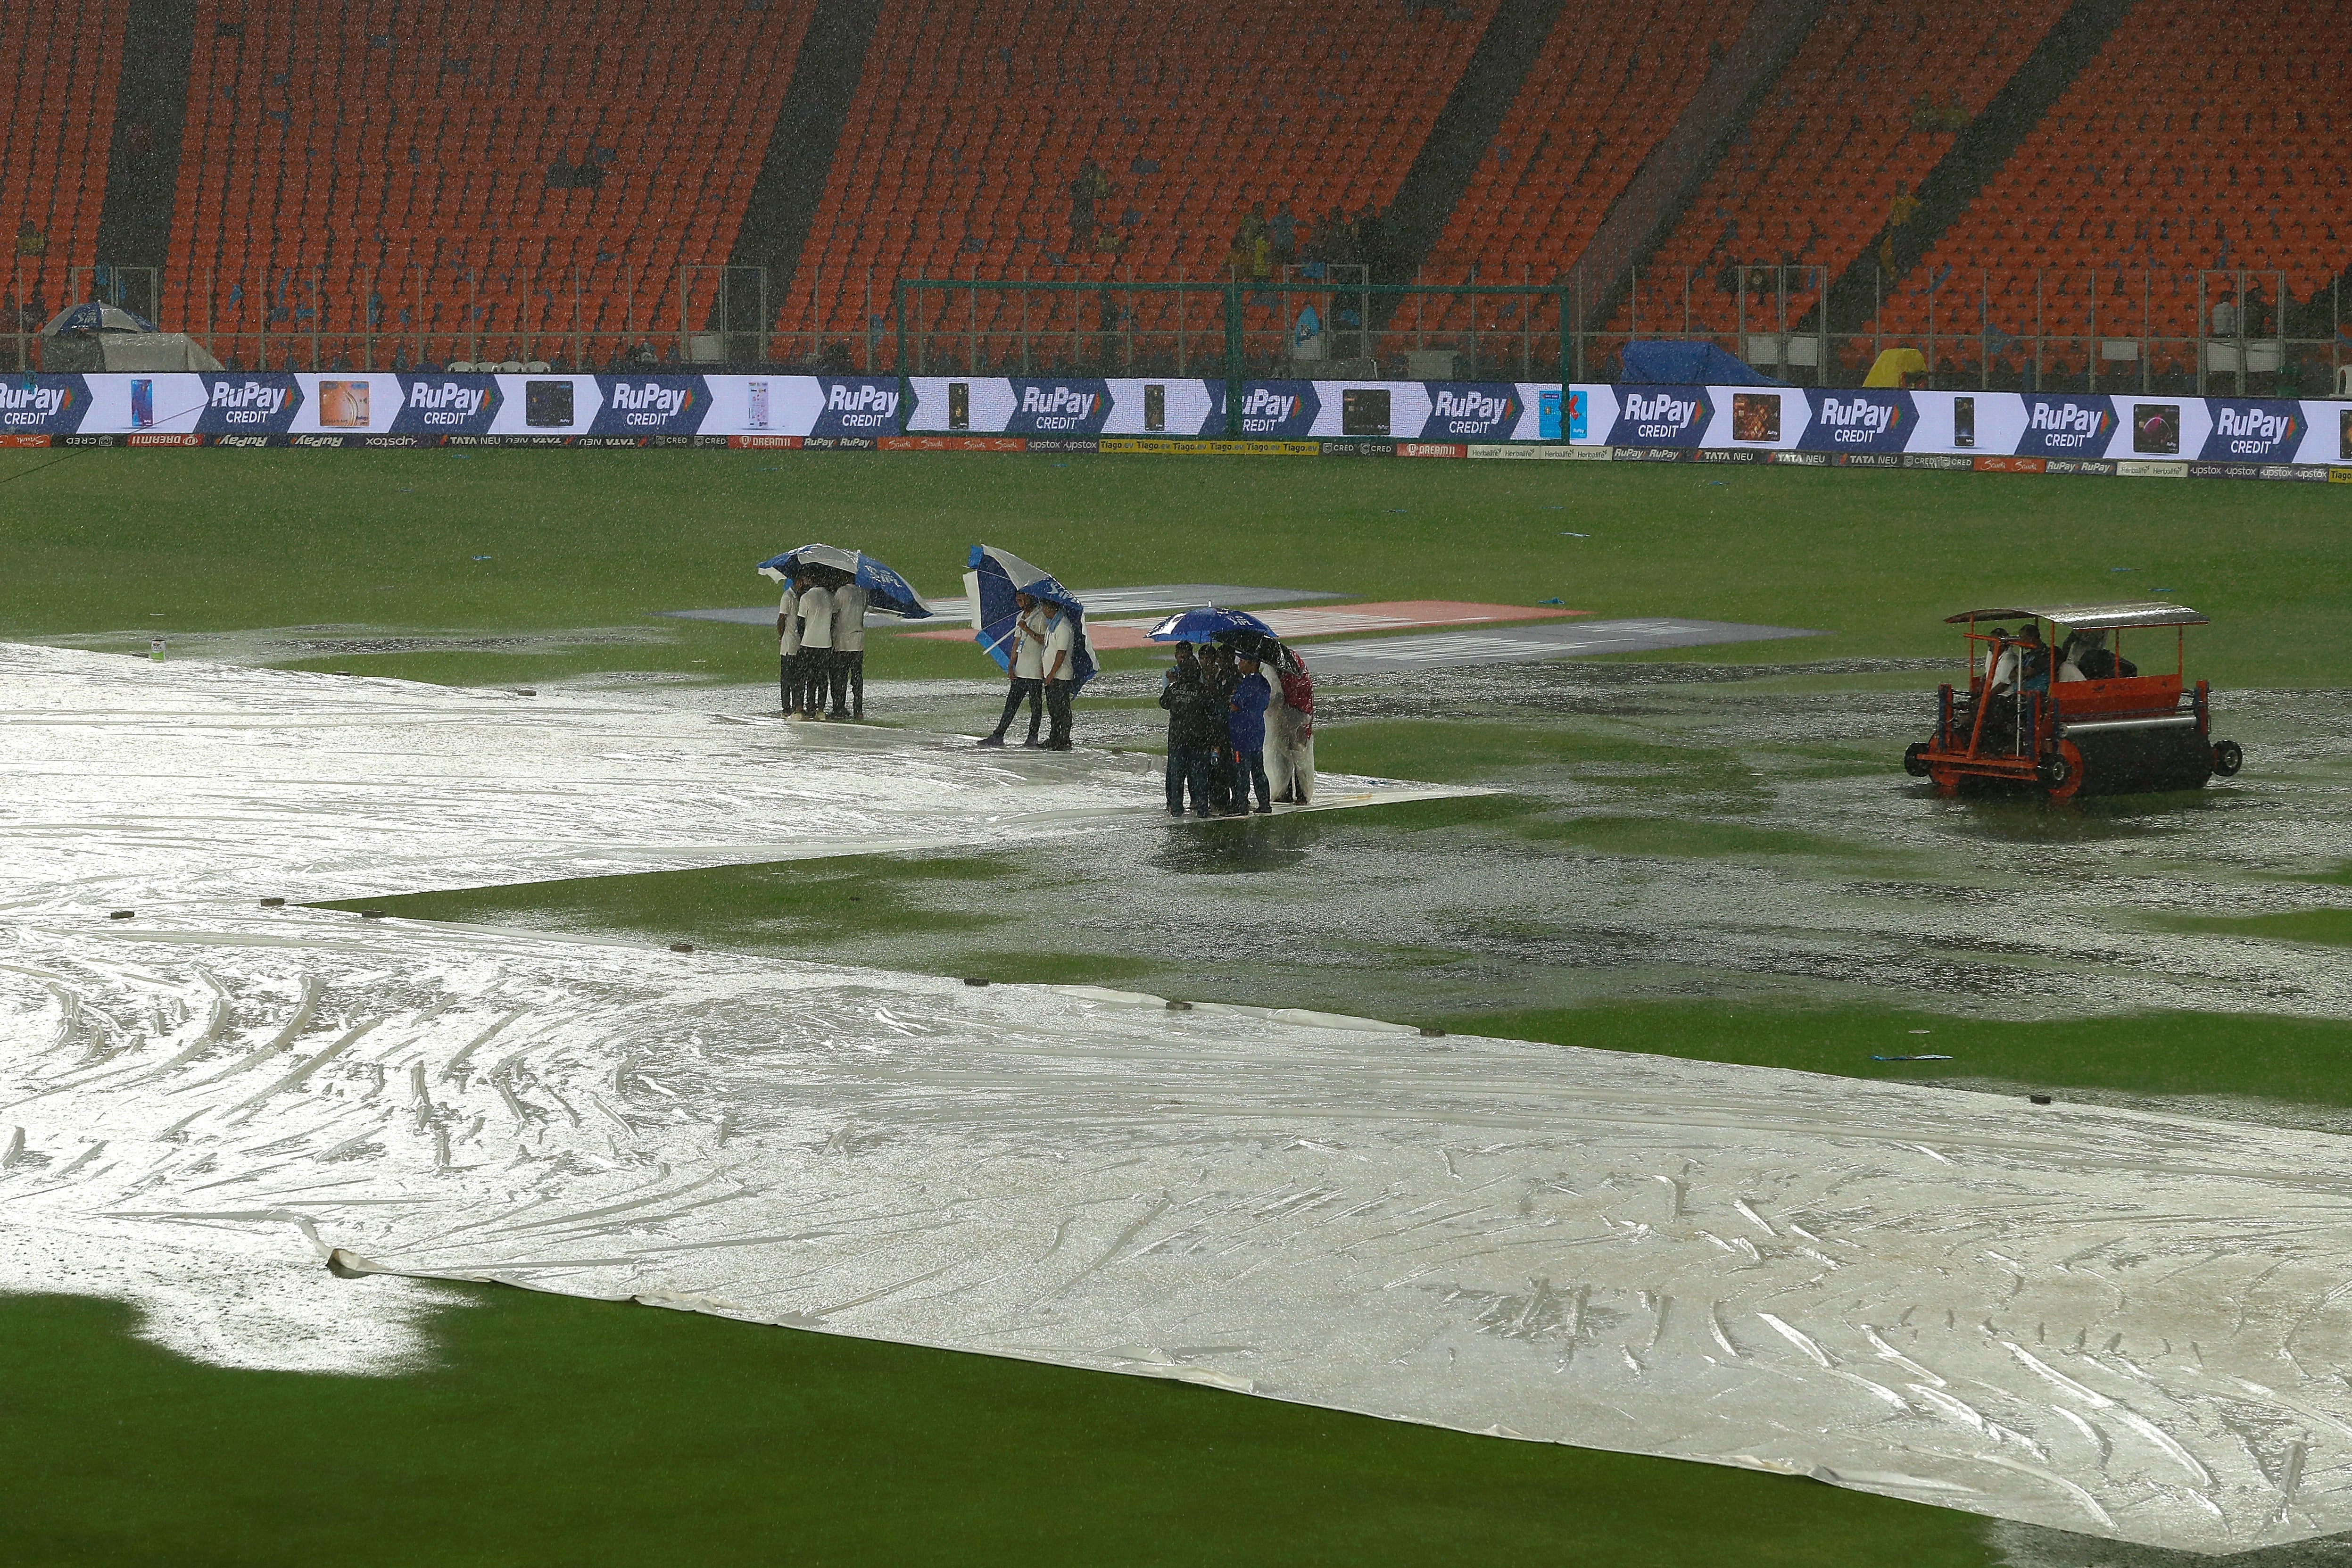 Ground staff huddle under umbrellas as rain delays the start of play during the 2023 IPL Final match between Chennai Super Kings and Gujarat Titans at Narendra Modi Stadium on 28 May 2023 in Ahmedabad